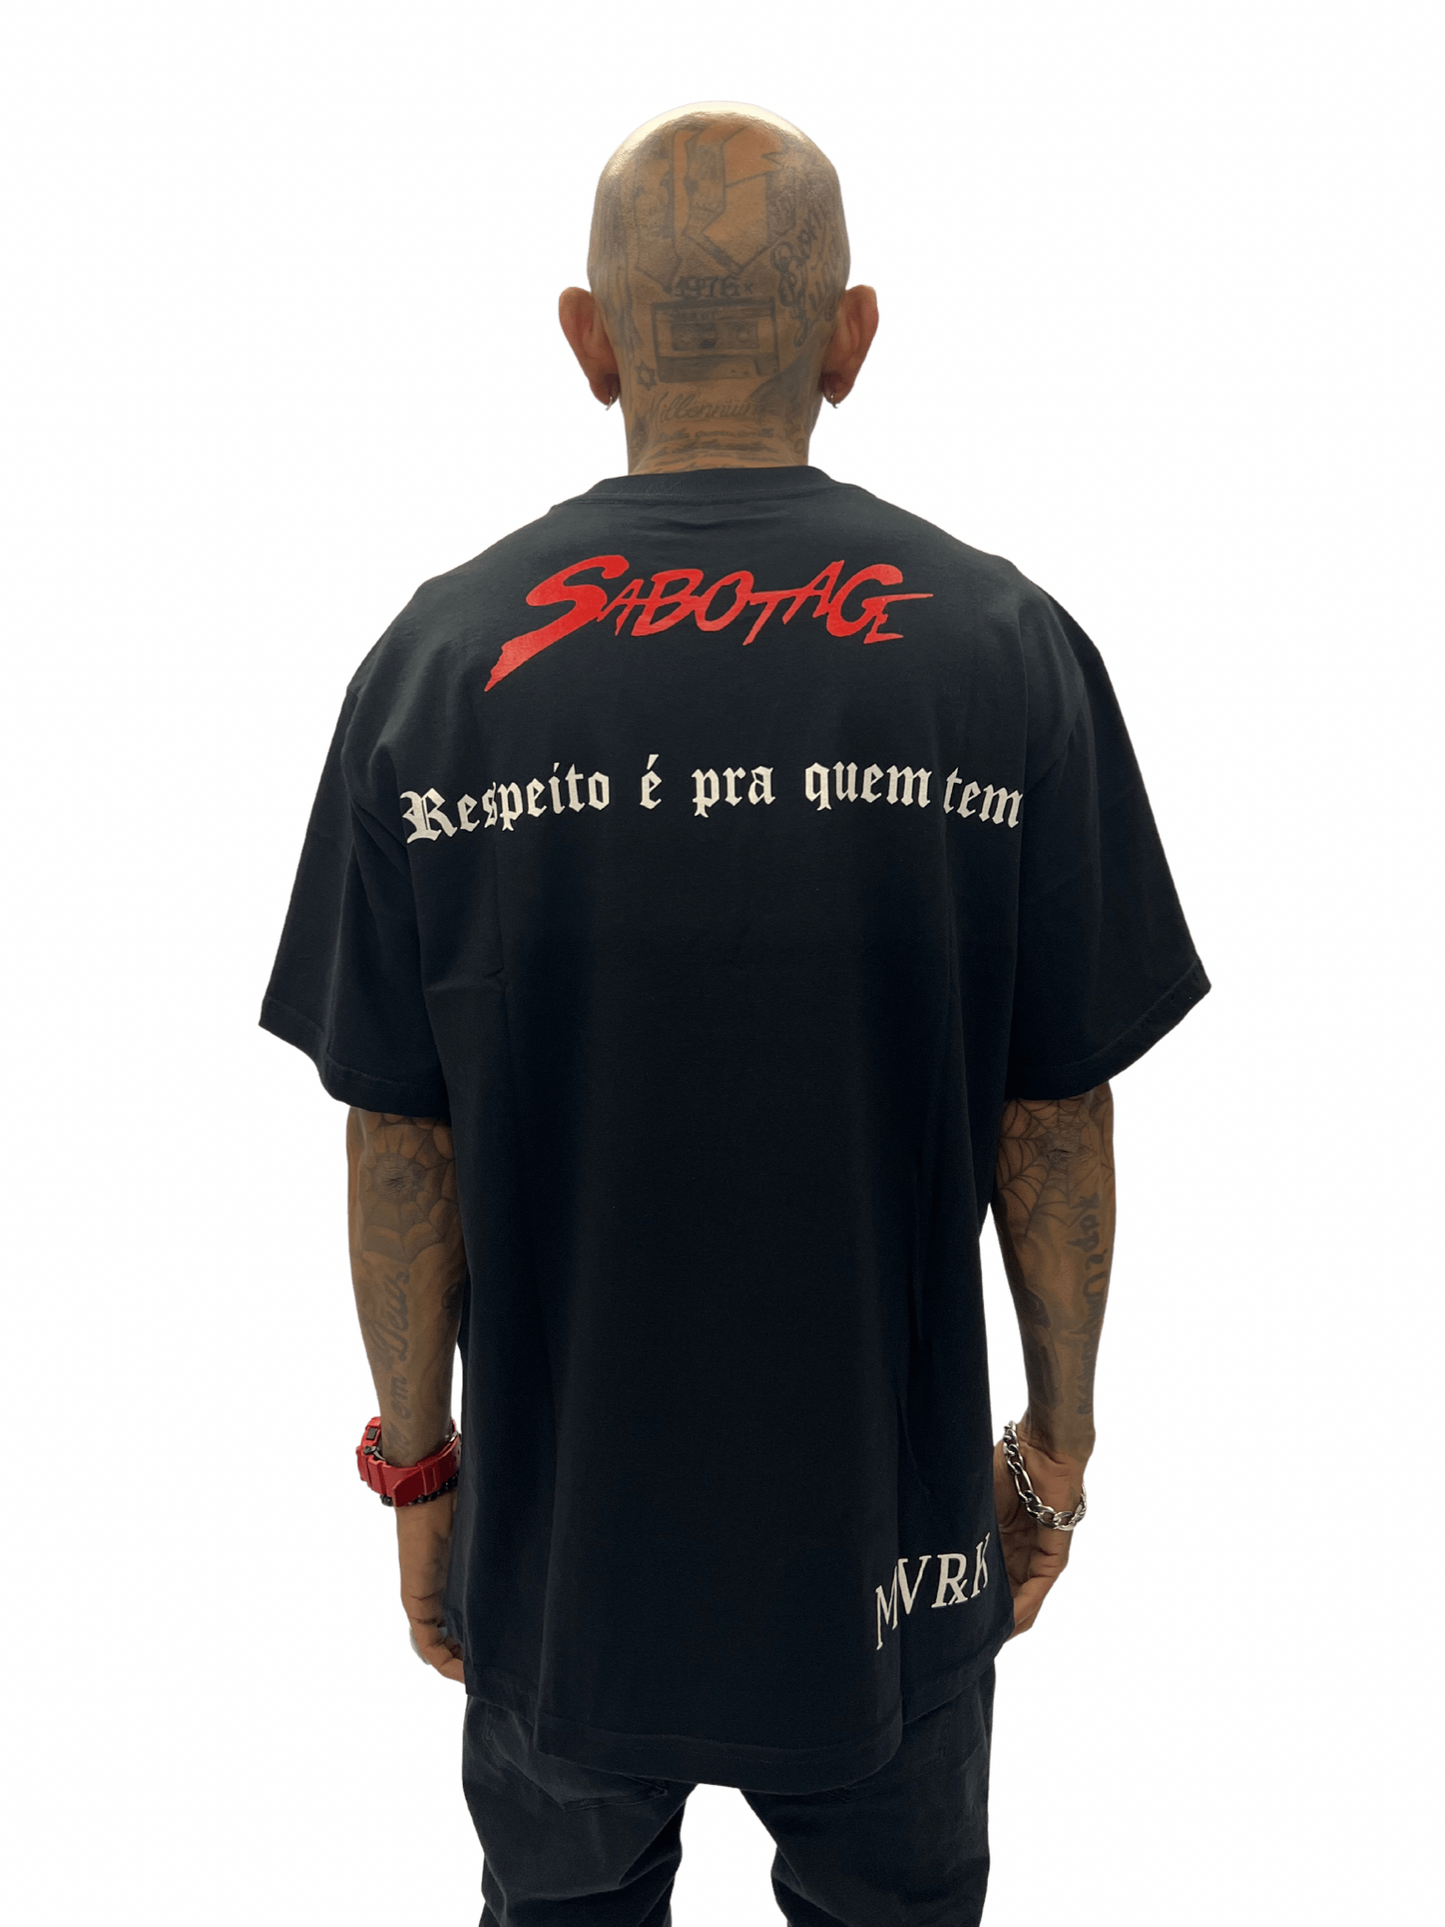 MVRK X SABOTAGE BLACK T-SHIRT RESPECT IS FOR THOSE WHO HAVE IT